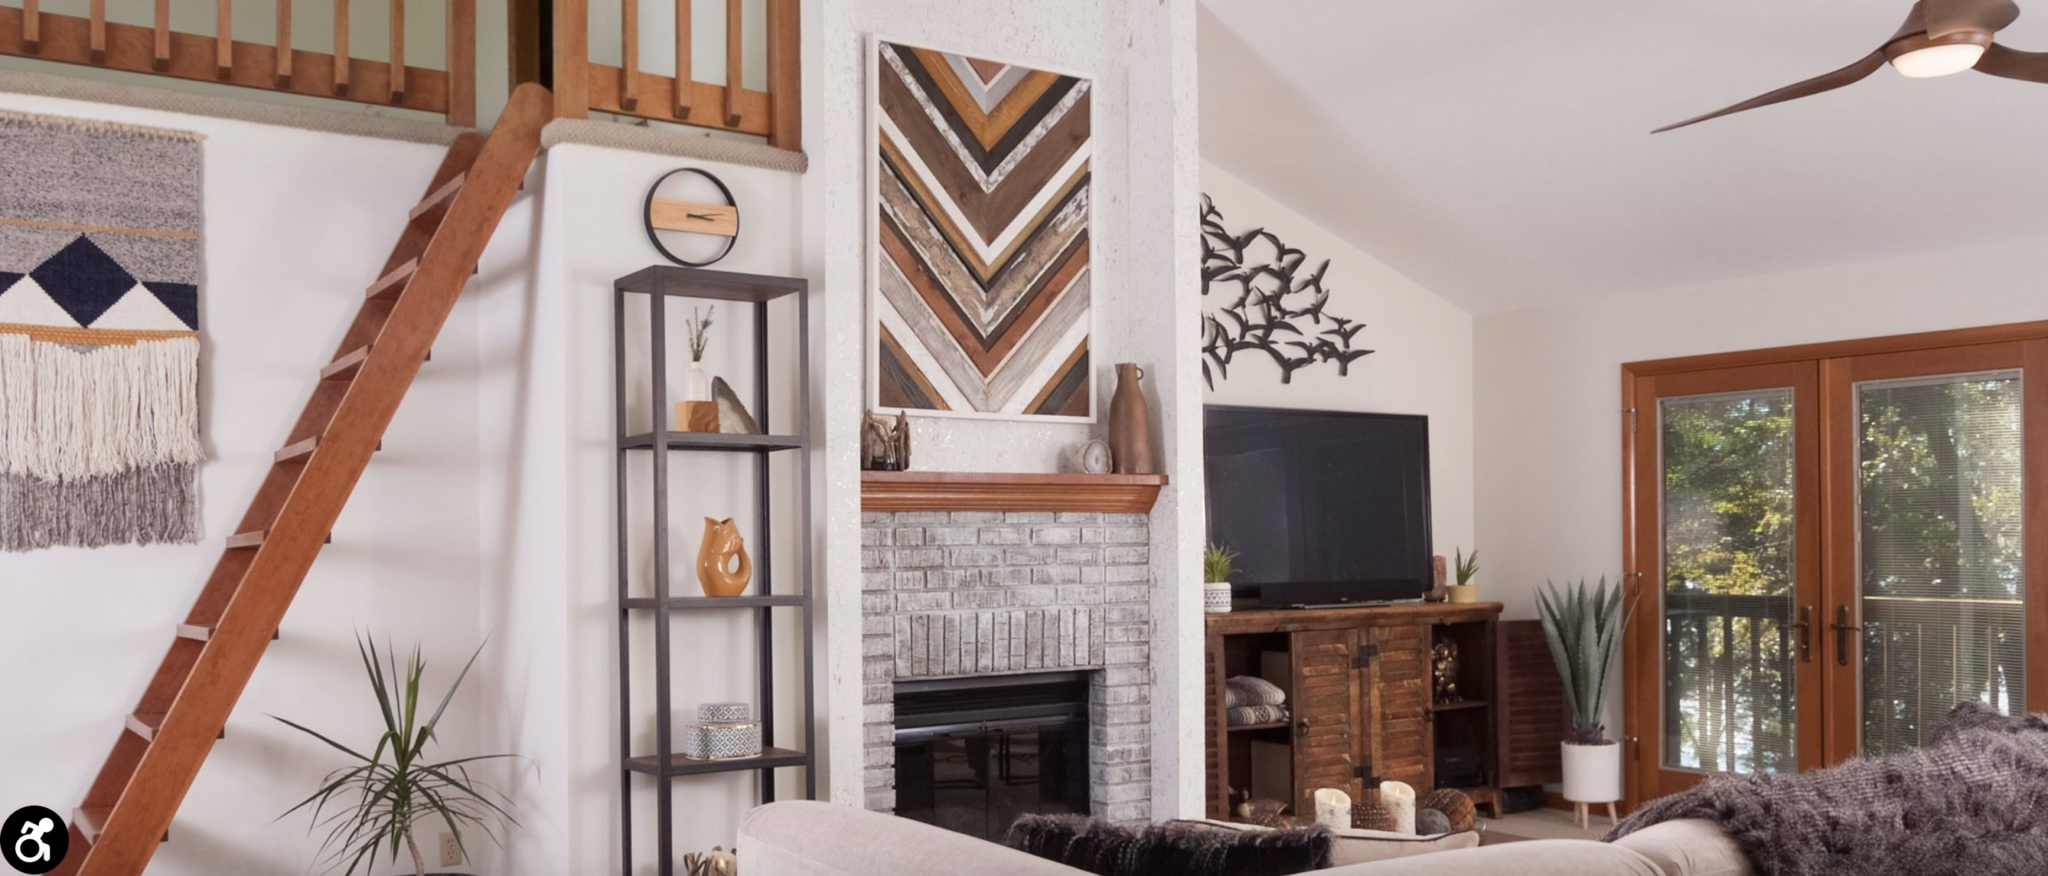 5 Ways to Make your Family Room Cozy